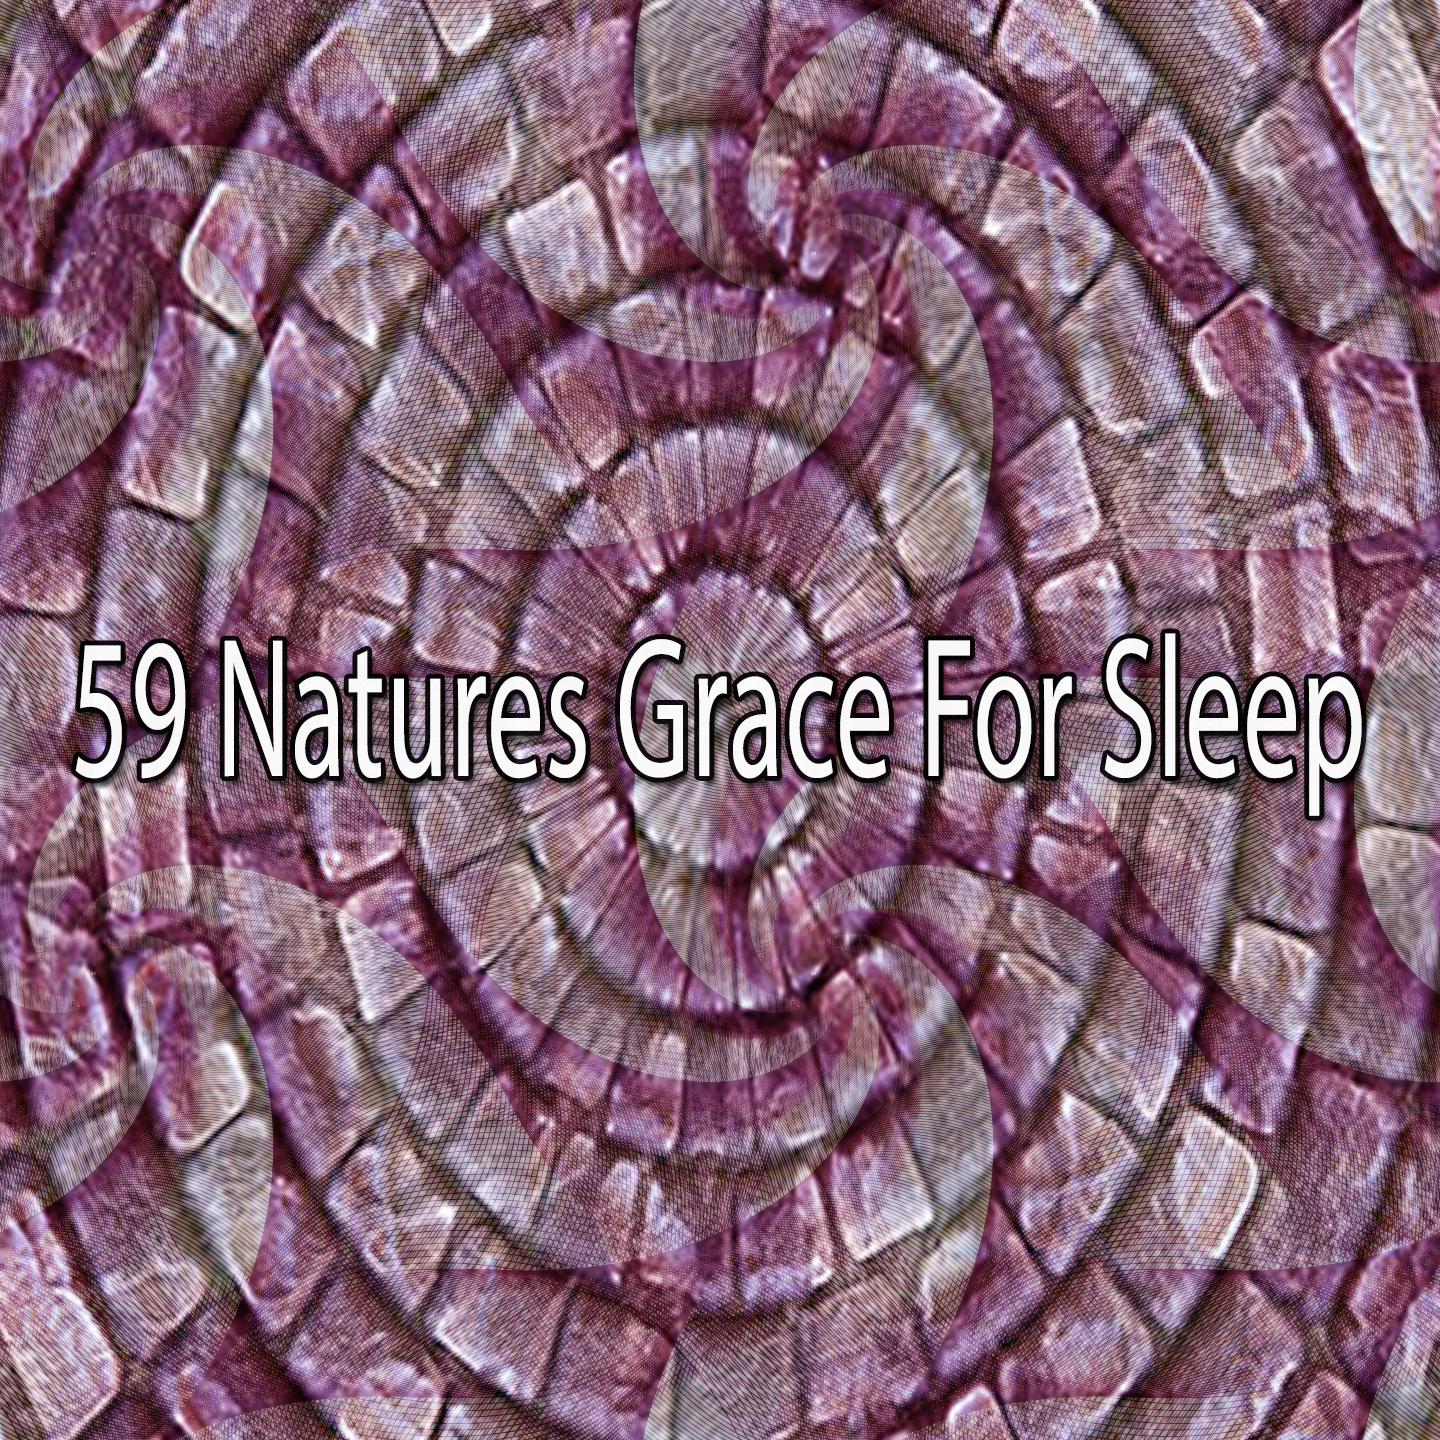 59 Natures Grace For Sleep